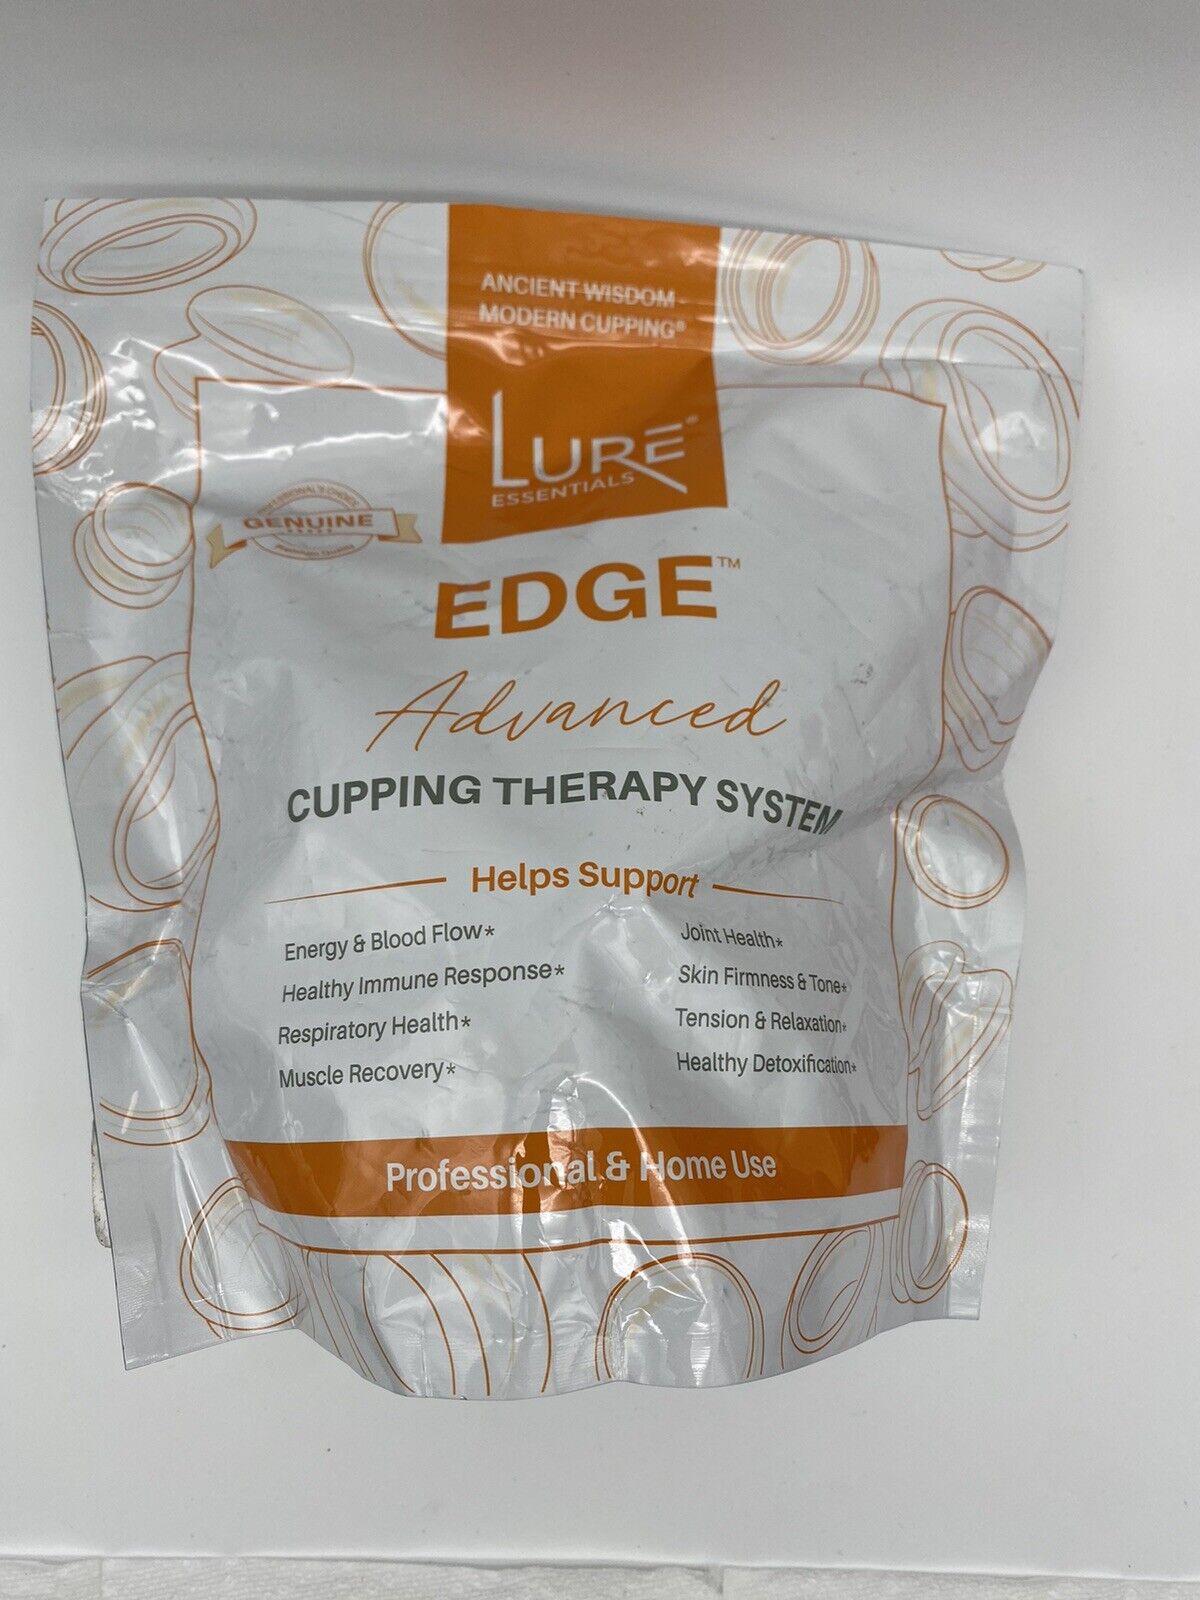 Lure Essentials Edge Advanced Cupping Therapy Professional & Home Use